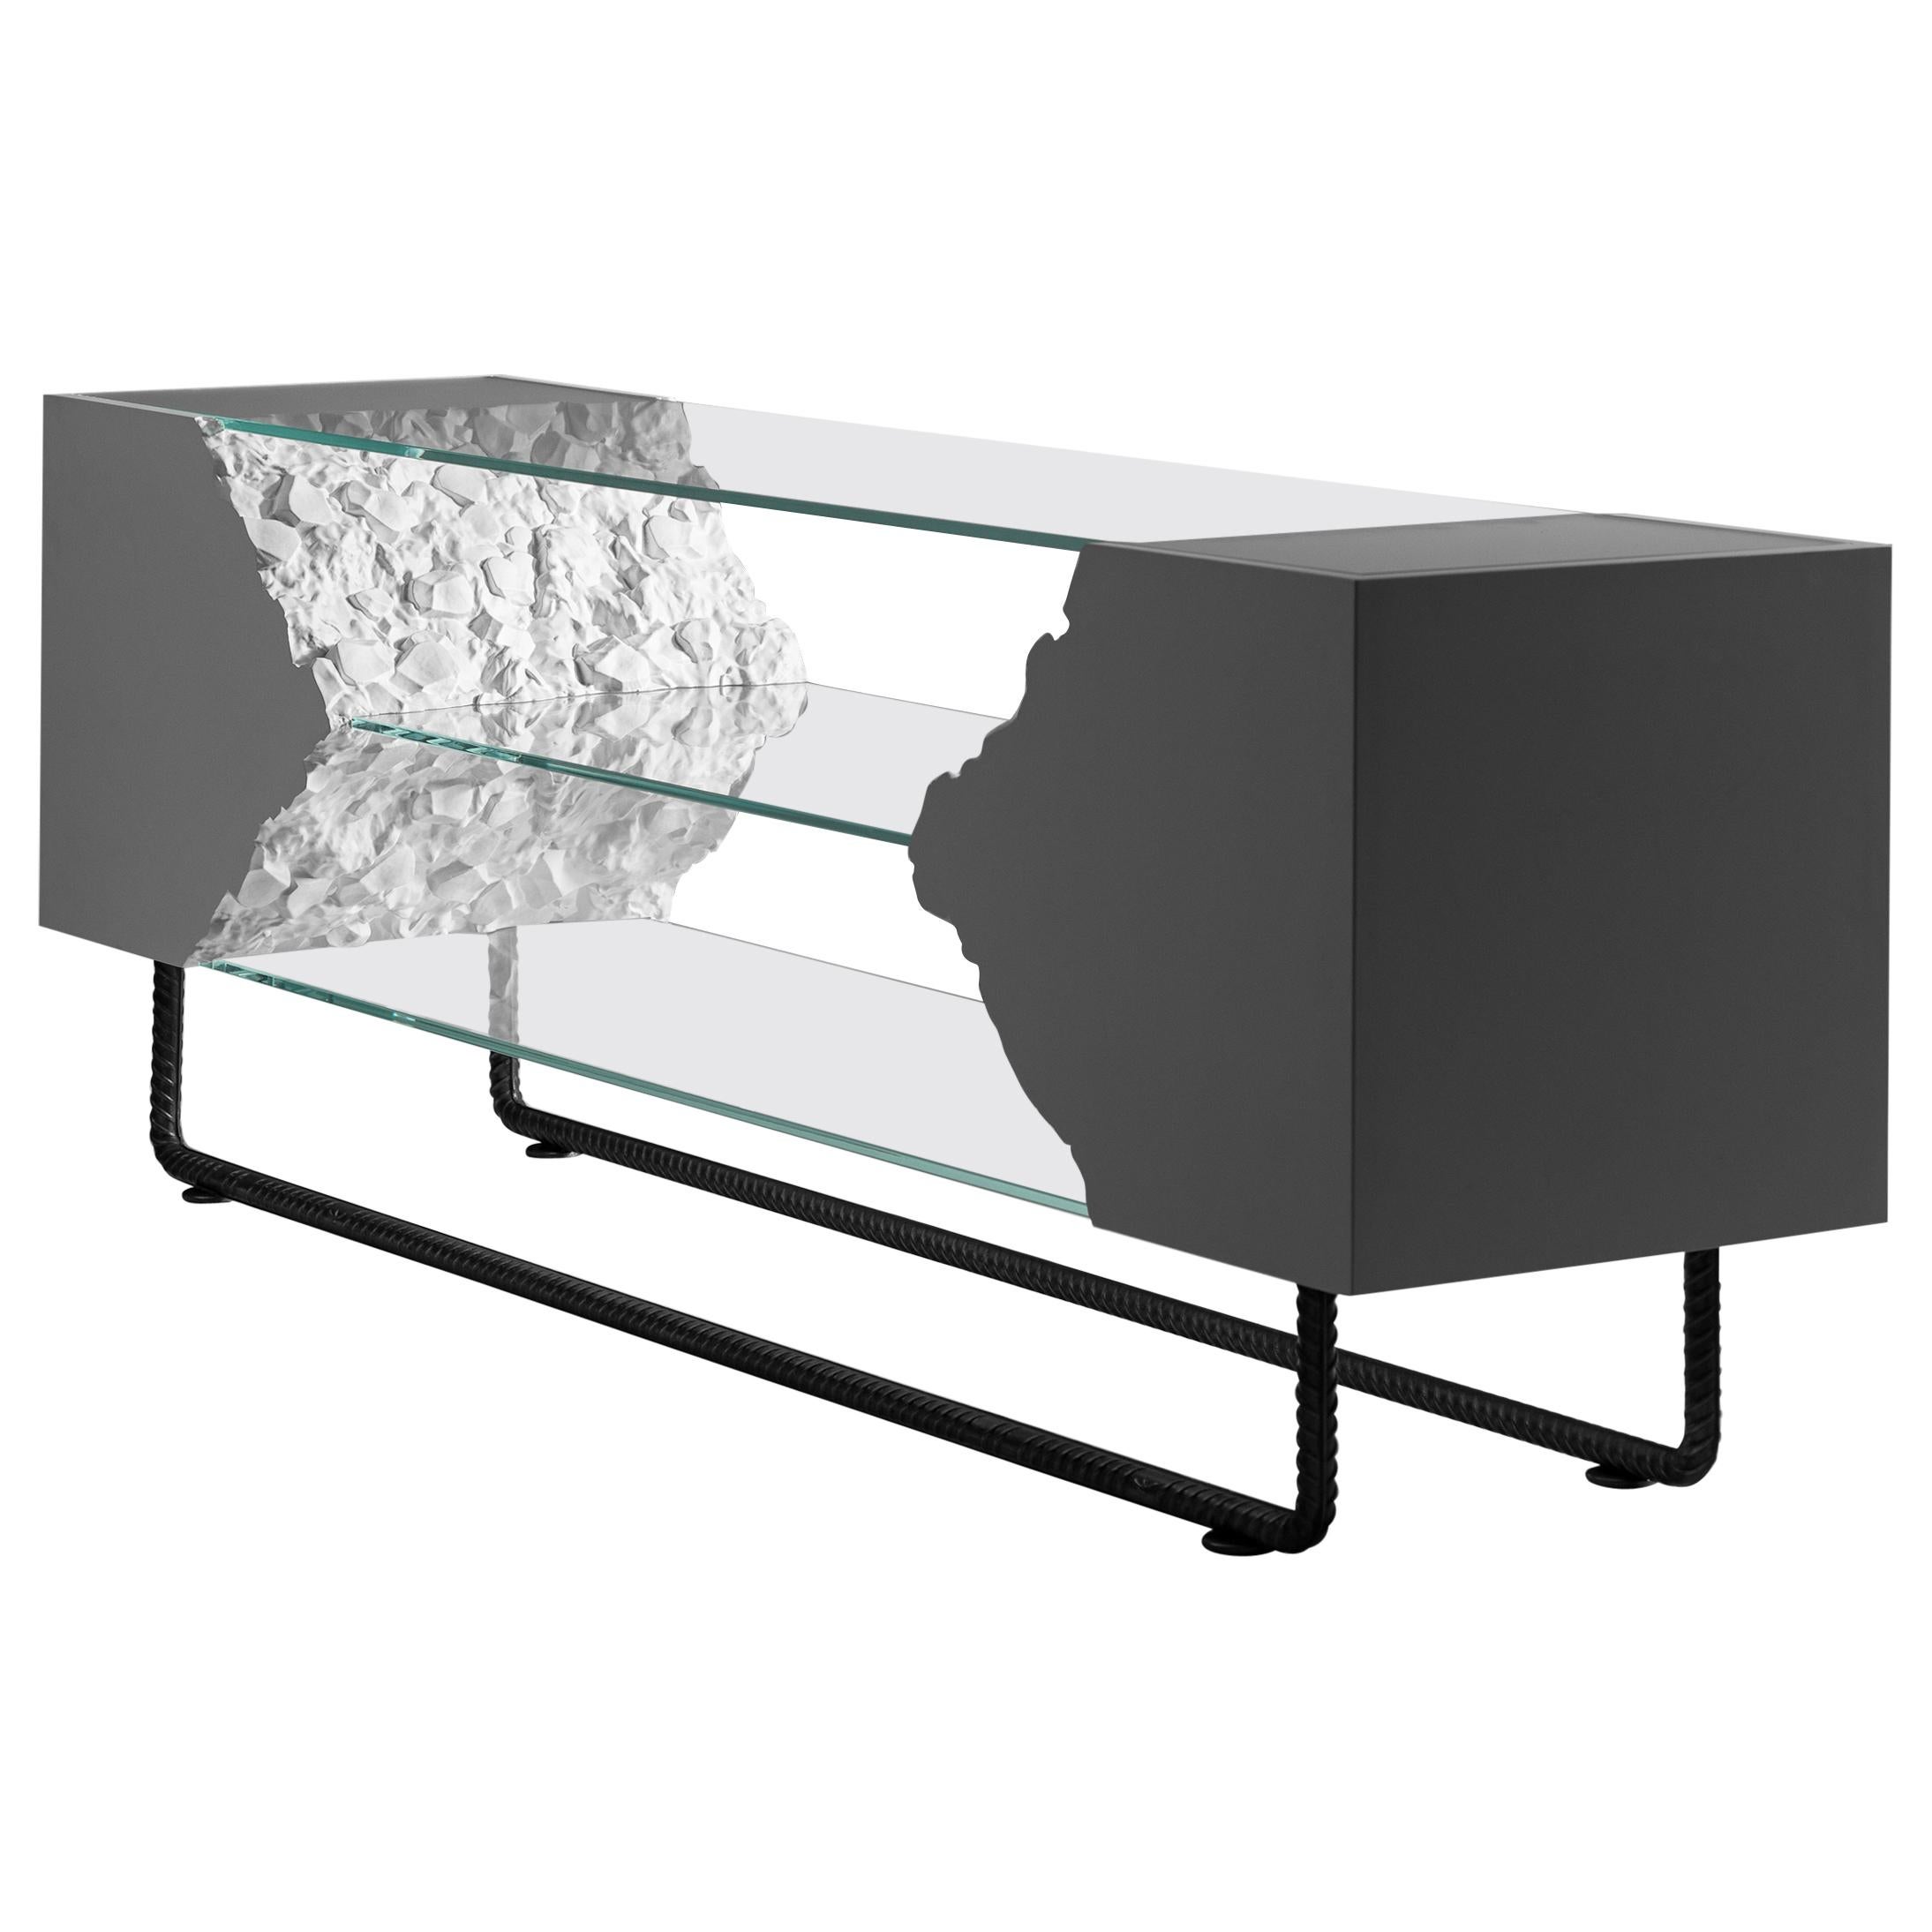 Console / TV Table Break Free Collection from Glass and Wood for Wild Interior